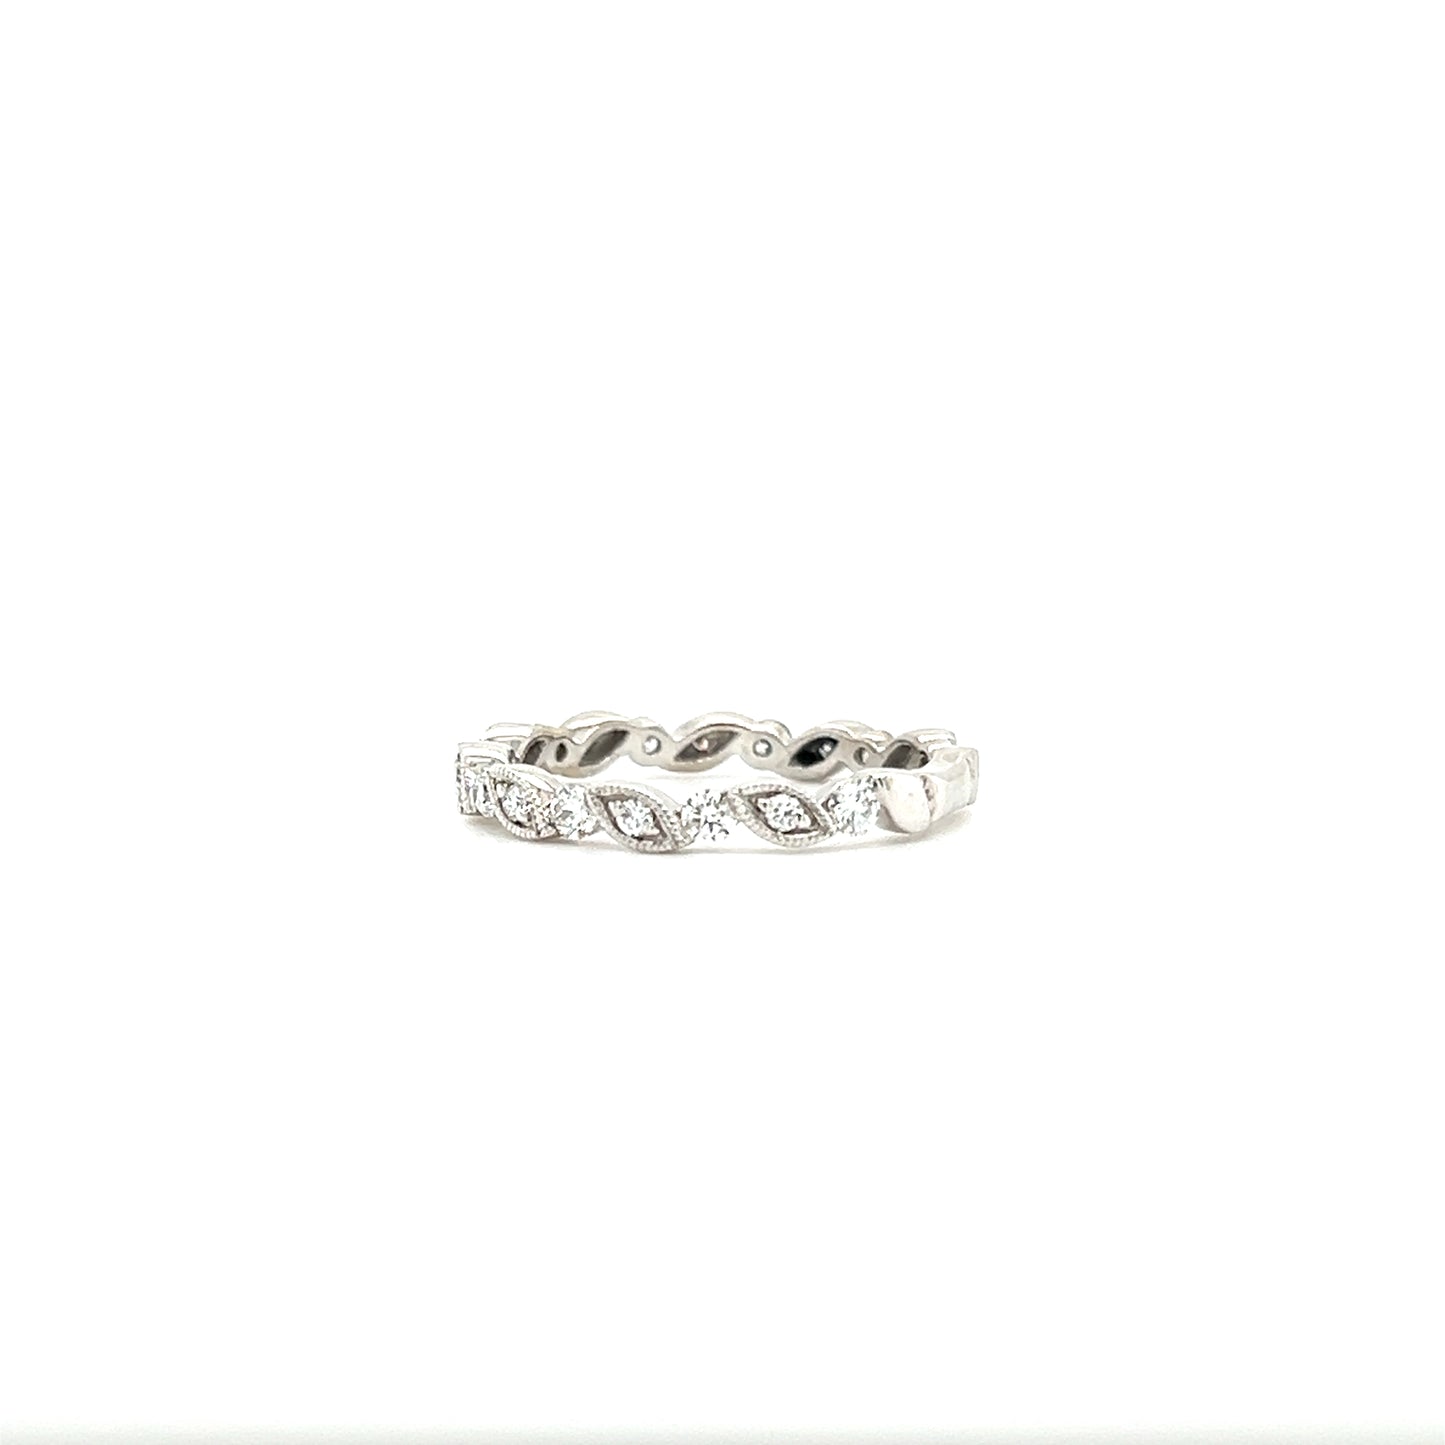 Marquise Diamond Ring with 0.42ctw of Diamonds in 14K White Gold